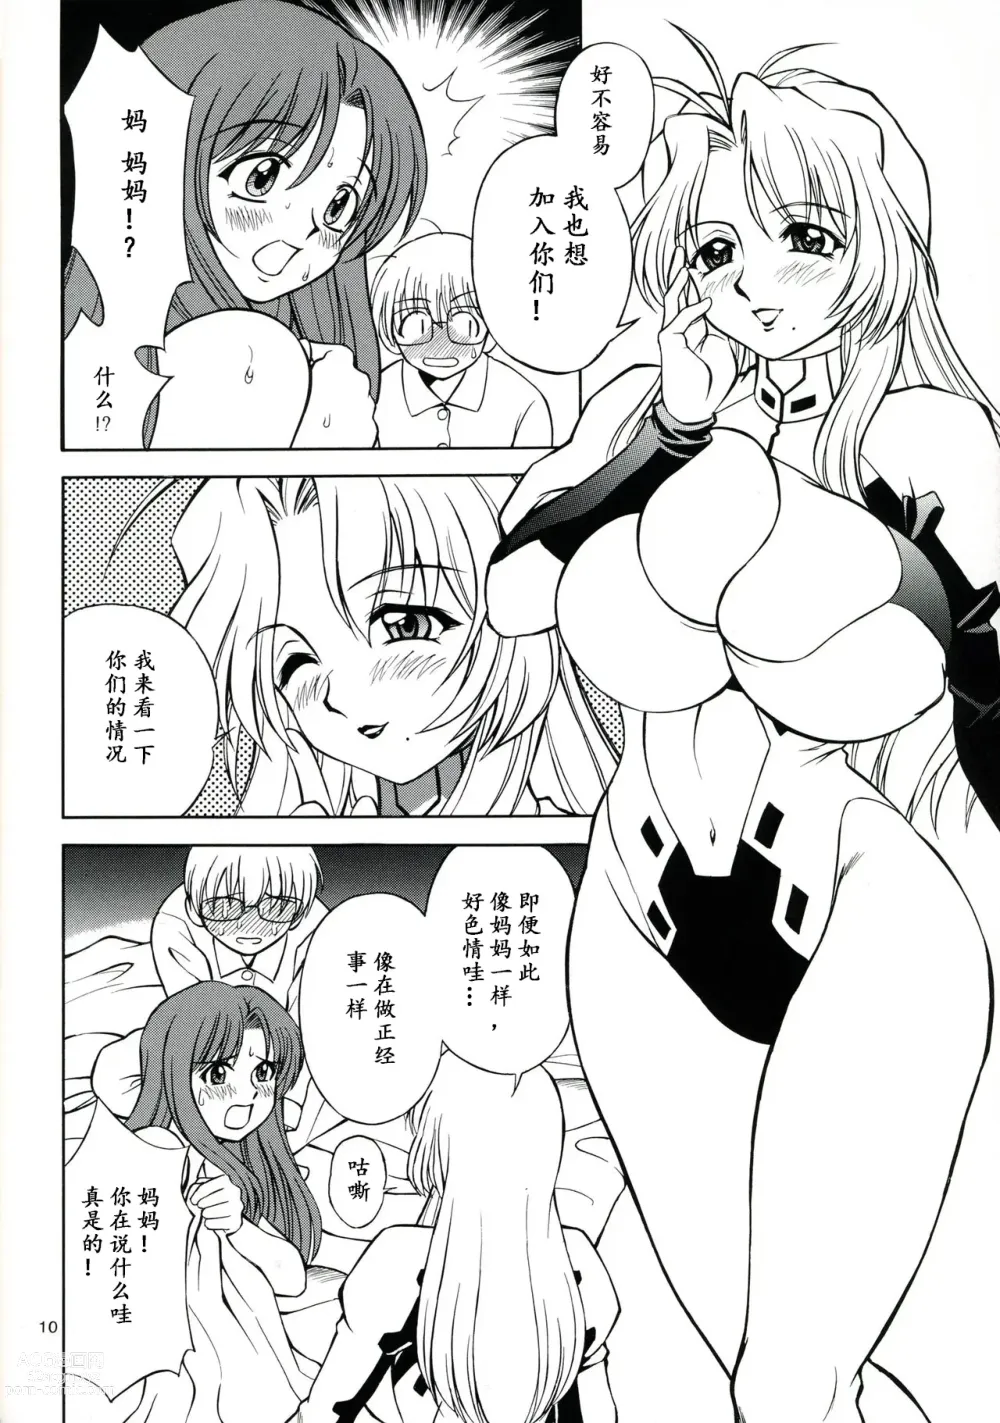 Page 9 of doujinshi Mother -Re Edition-